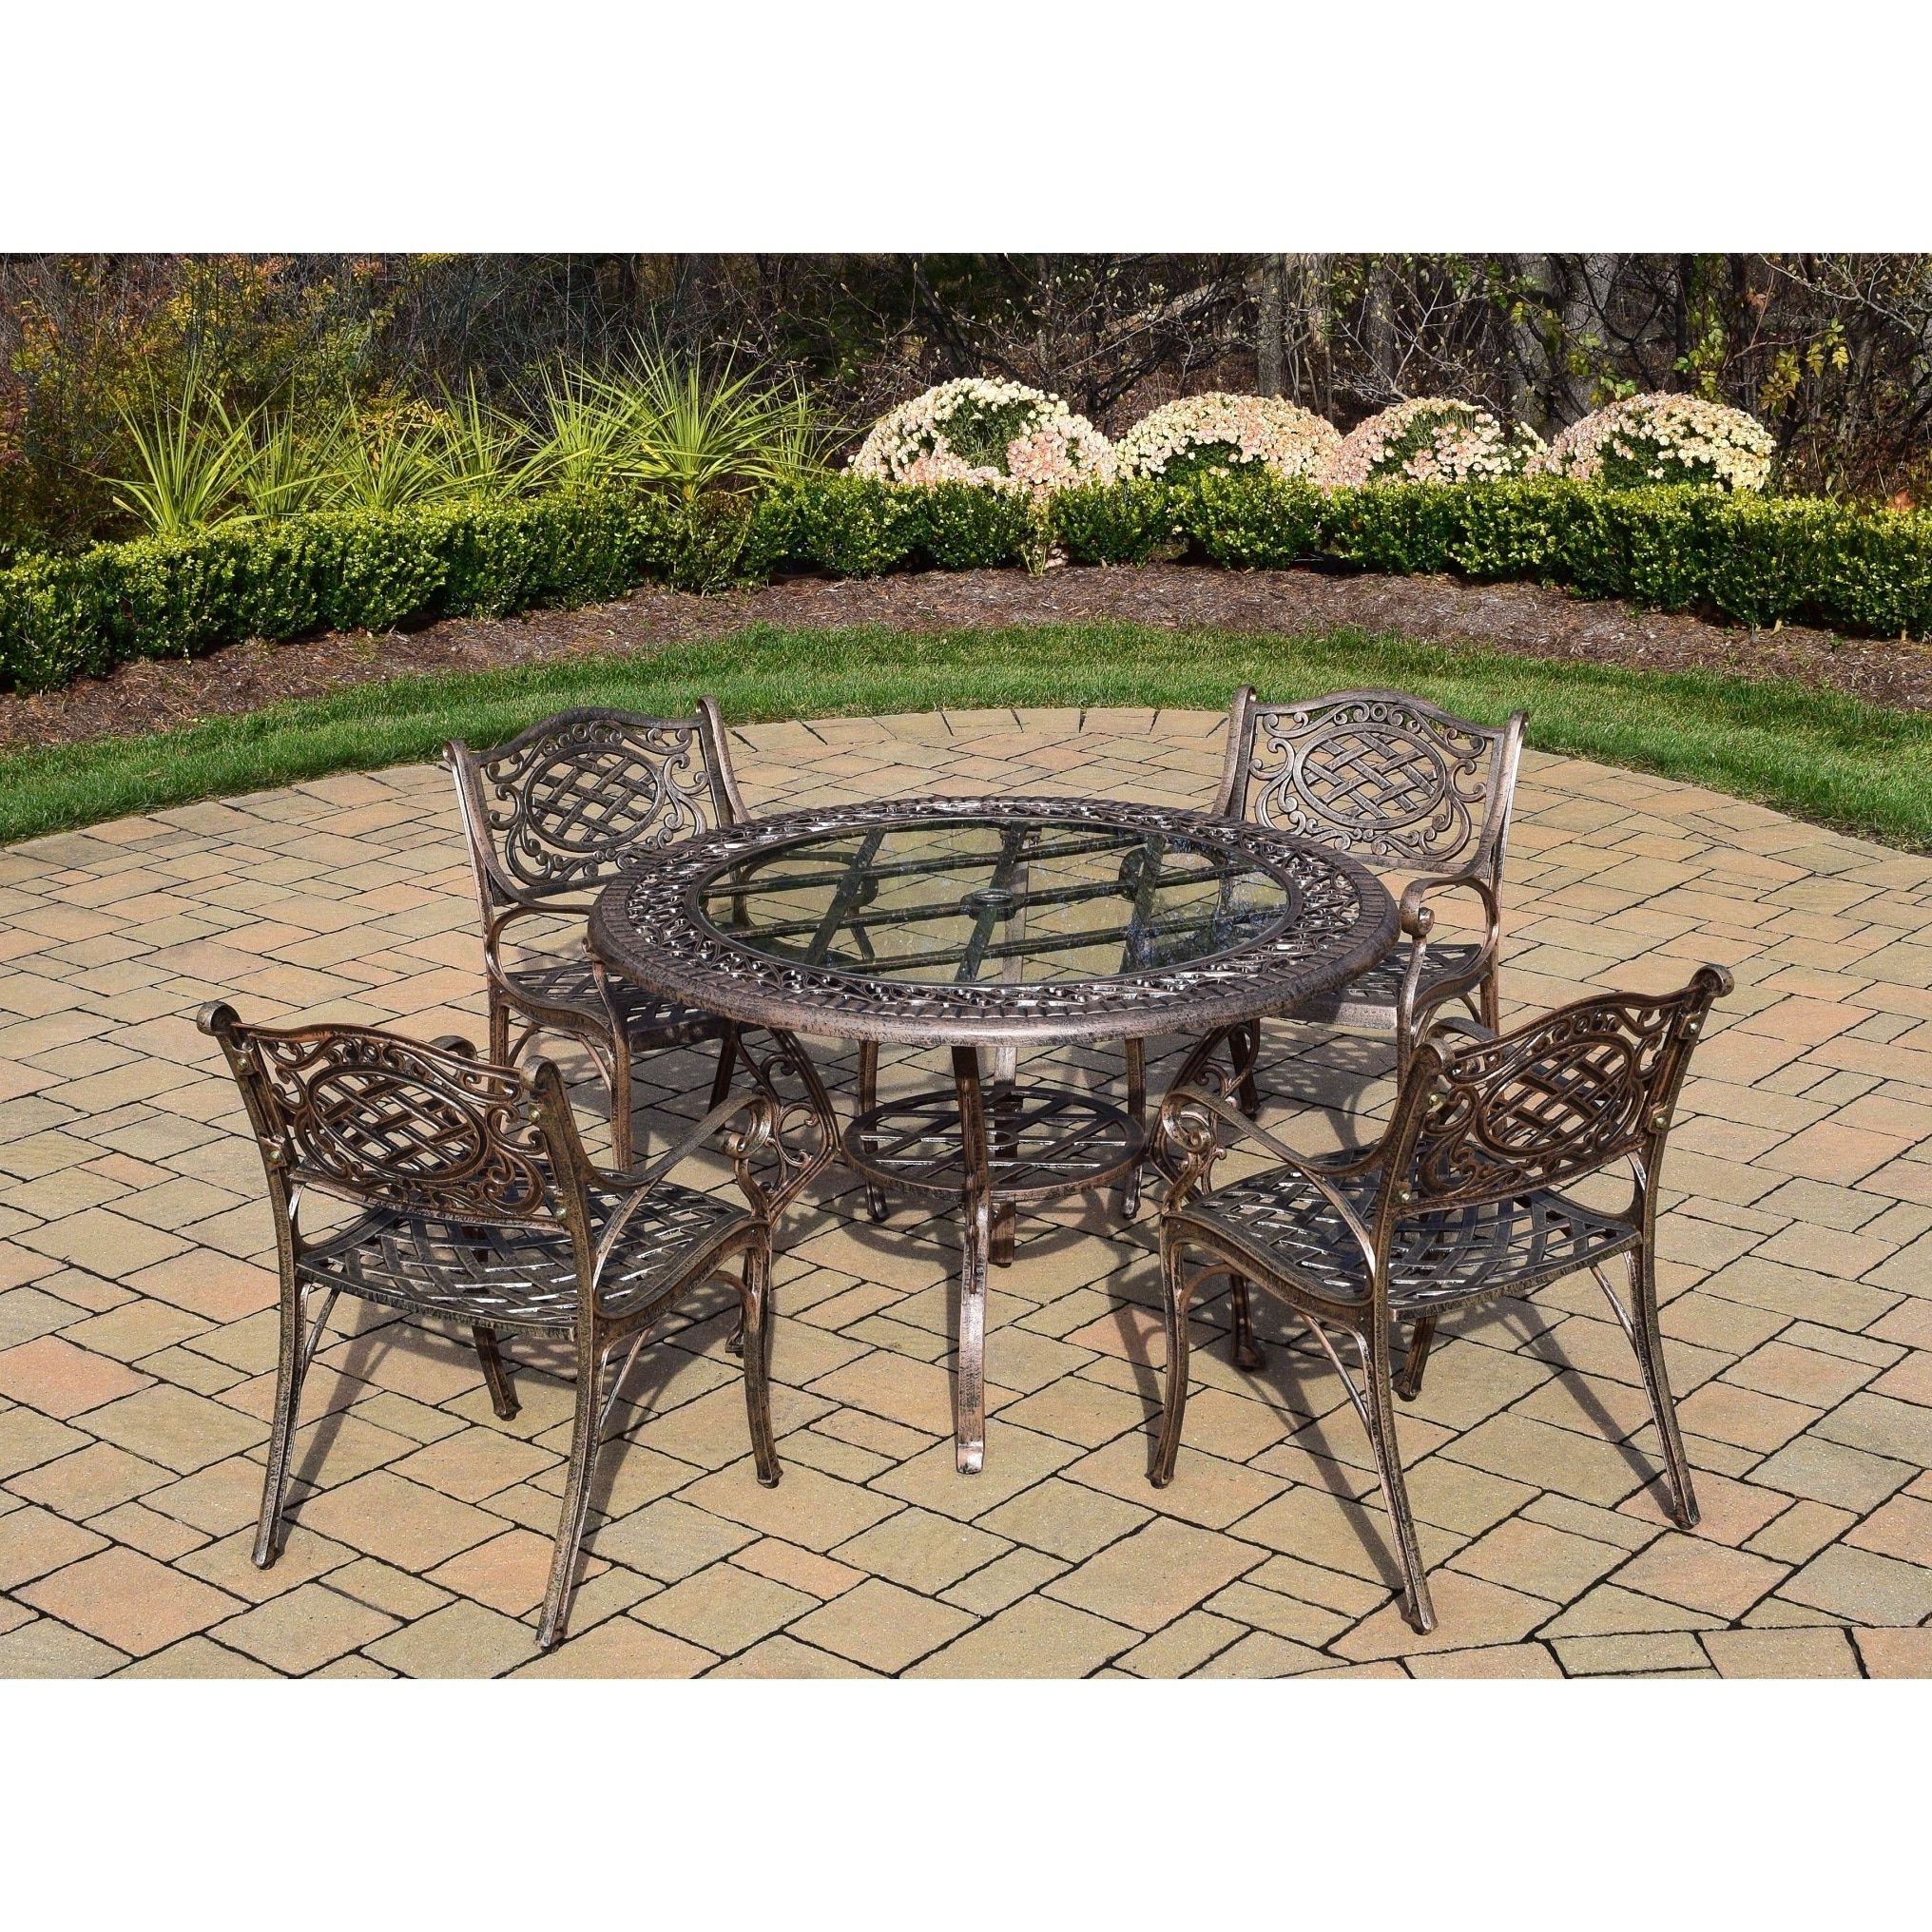 Oakland Living Corporation 5 Piece Patio Dining Set, With 48 Inch Round Intended For Current 5 Piece Round Patio Dining Sets (View 14 of 15)